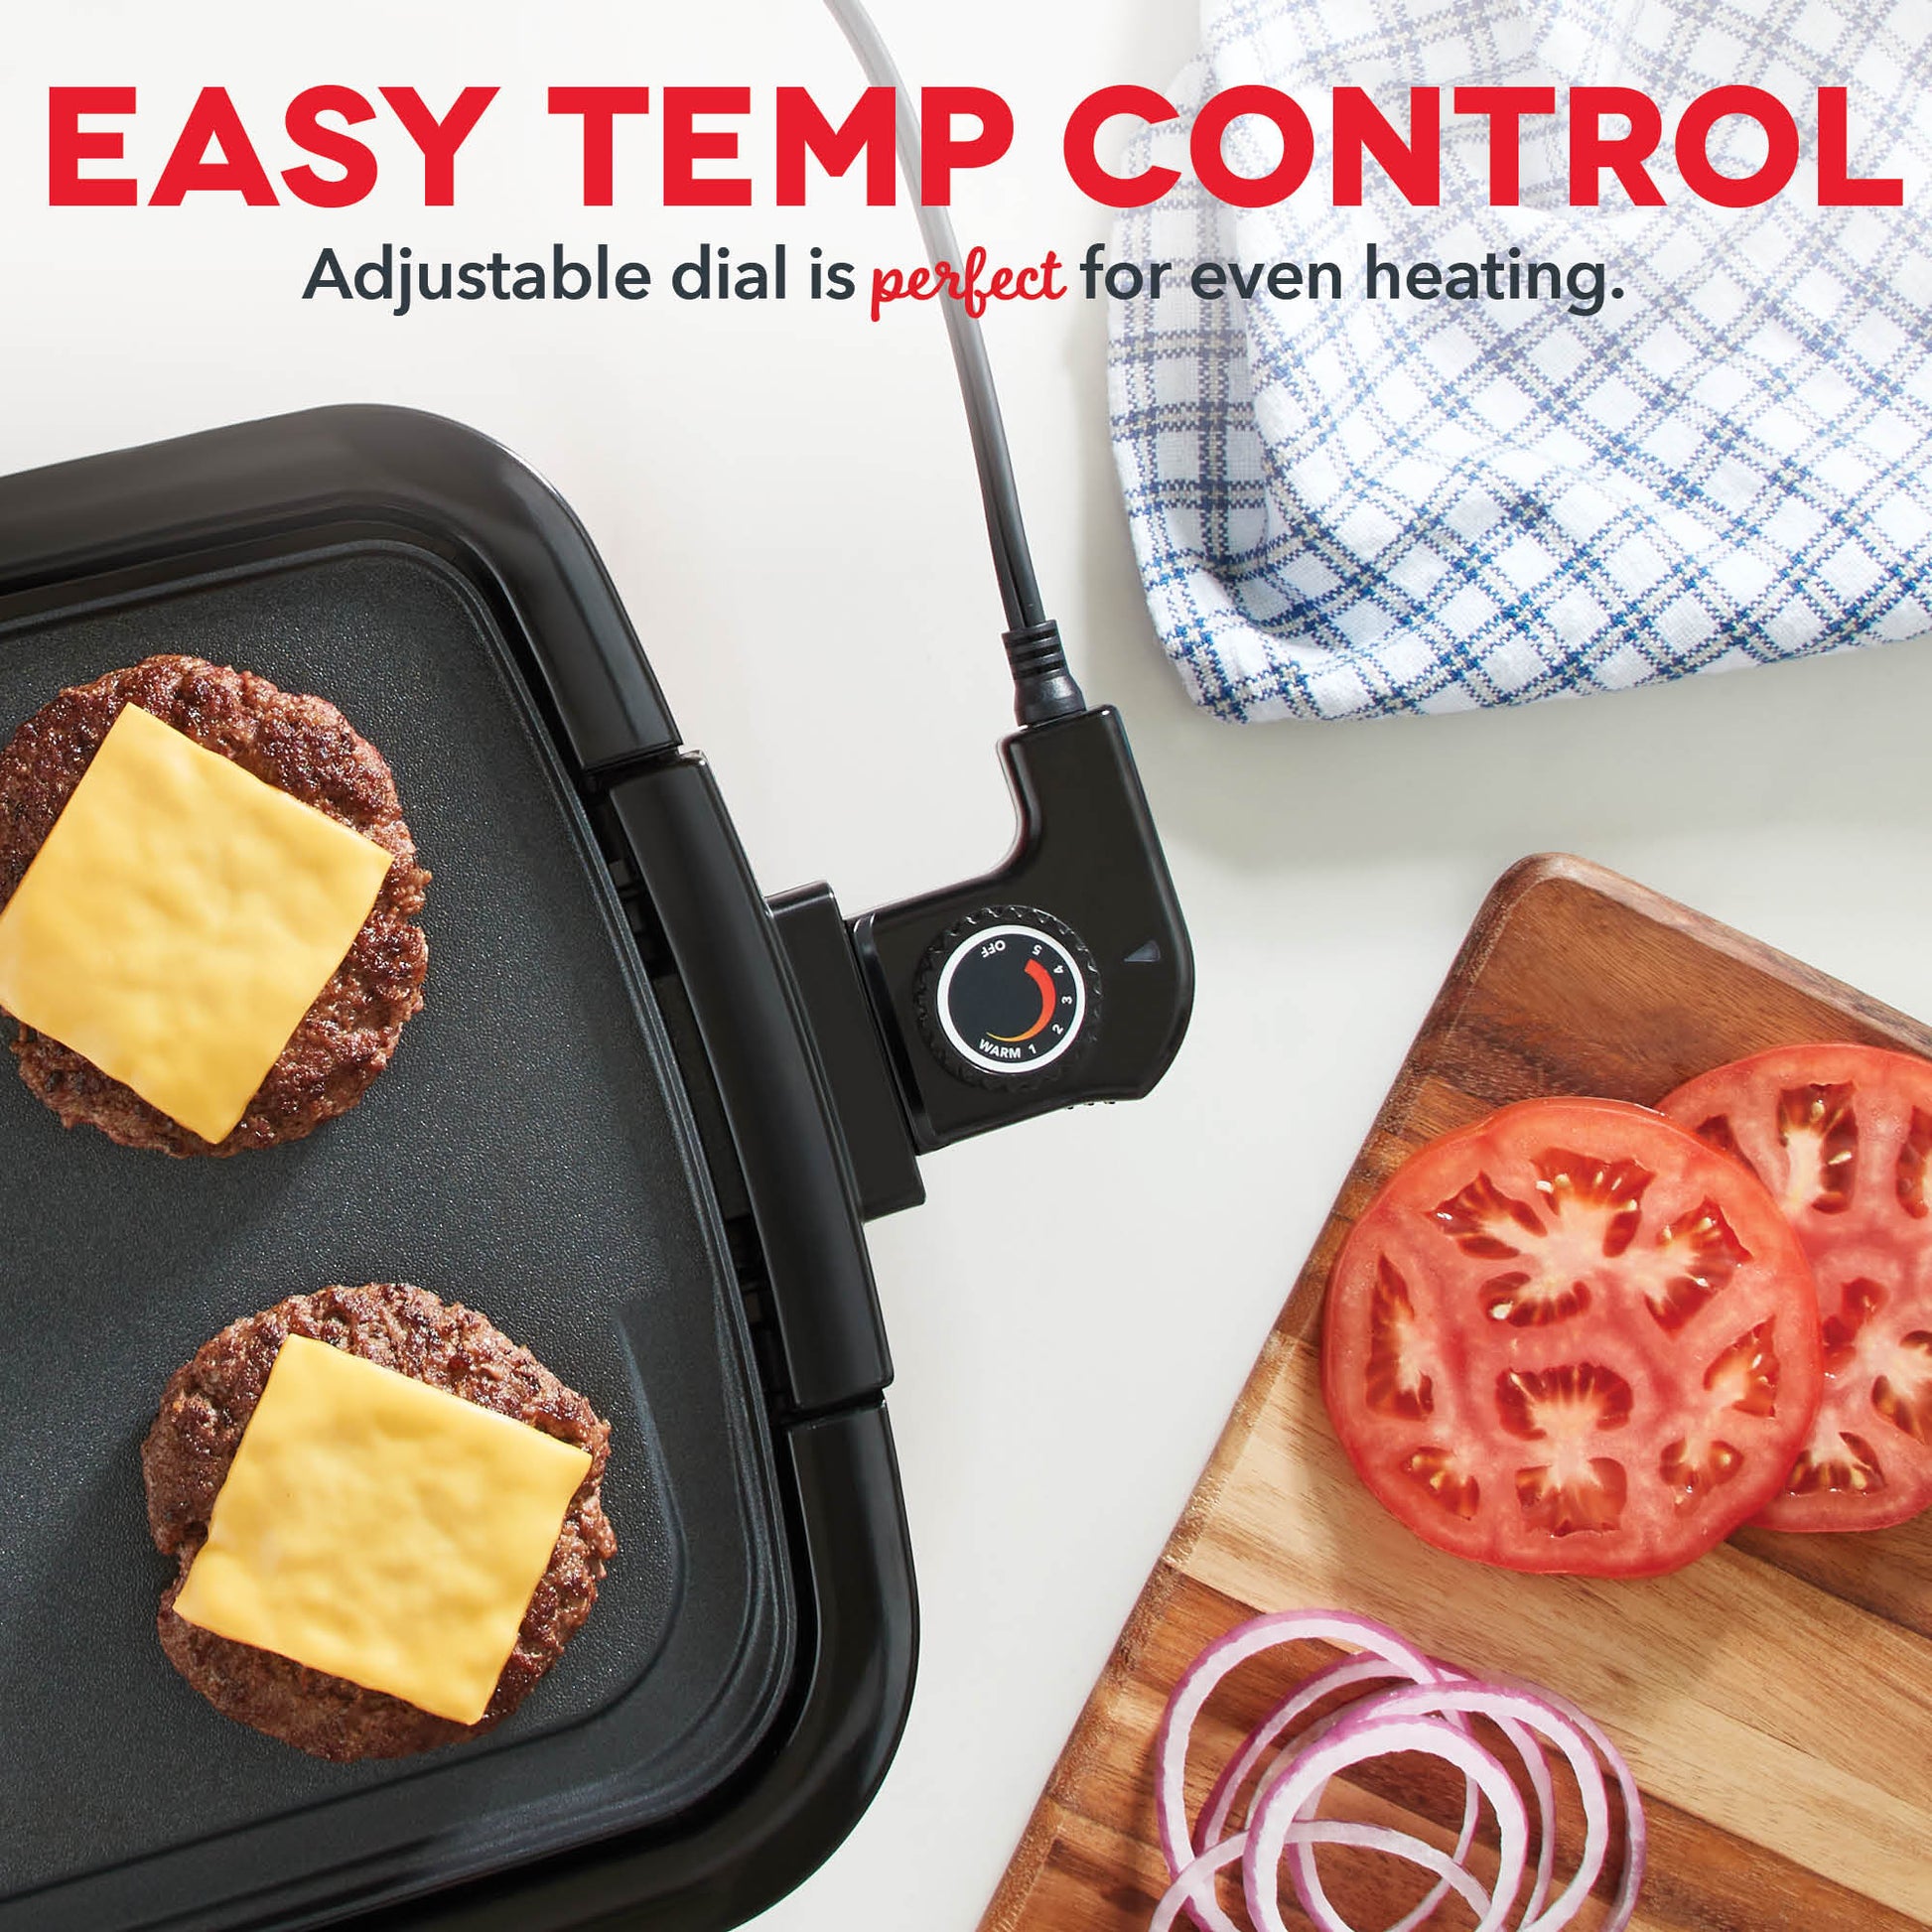 DASH Everyday Nonstick Electric Griddle for Pancakes, Burgers, Quesadillas,  Eggs & other on the go Breakfast, Lunch & Snacks with Drip Tray + Included  Recipe Bo…